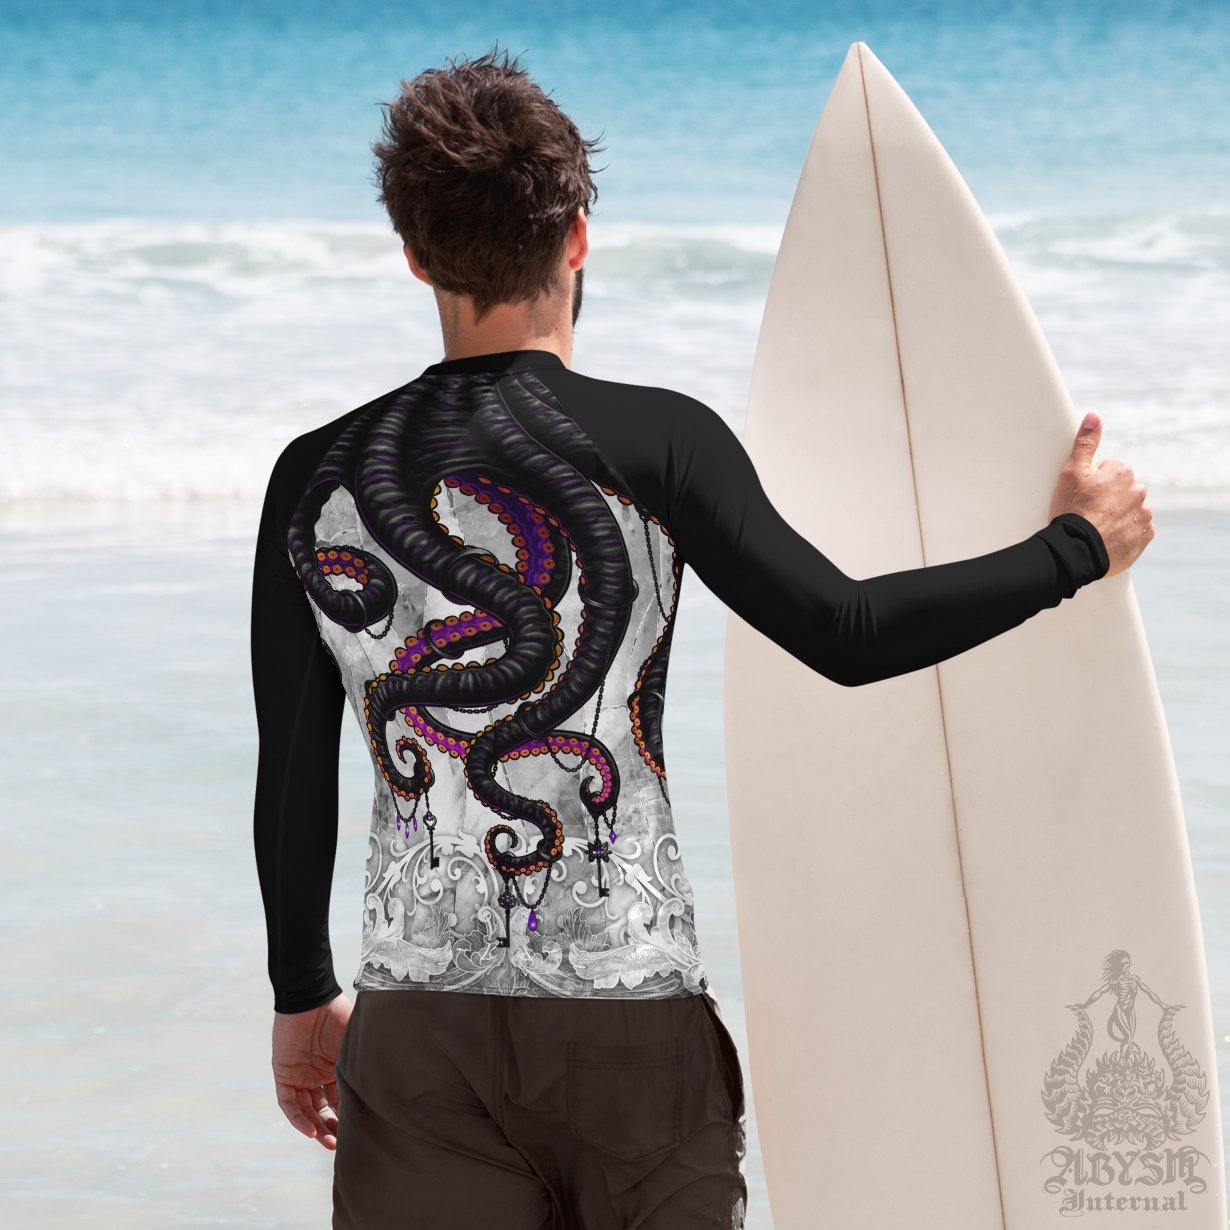 Octopus Men's Rash Guard, Long Sleeve spandex shirt for surfing, swimwear top for water sports - Stone Black and White Goth - Abysm Internal